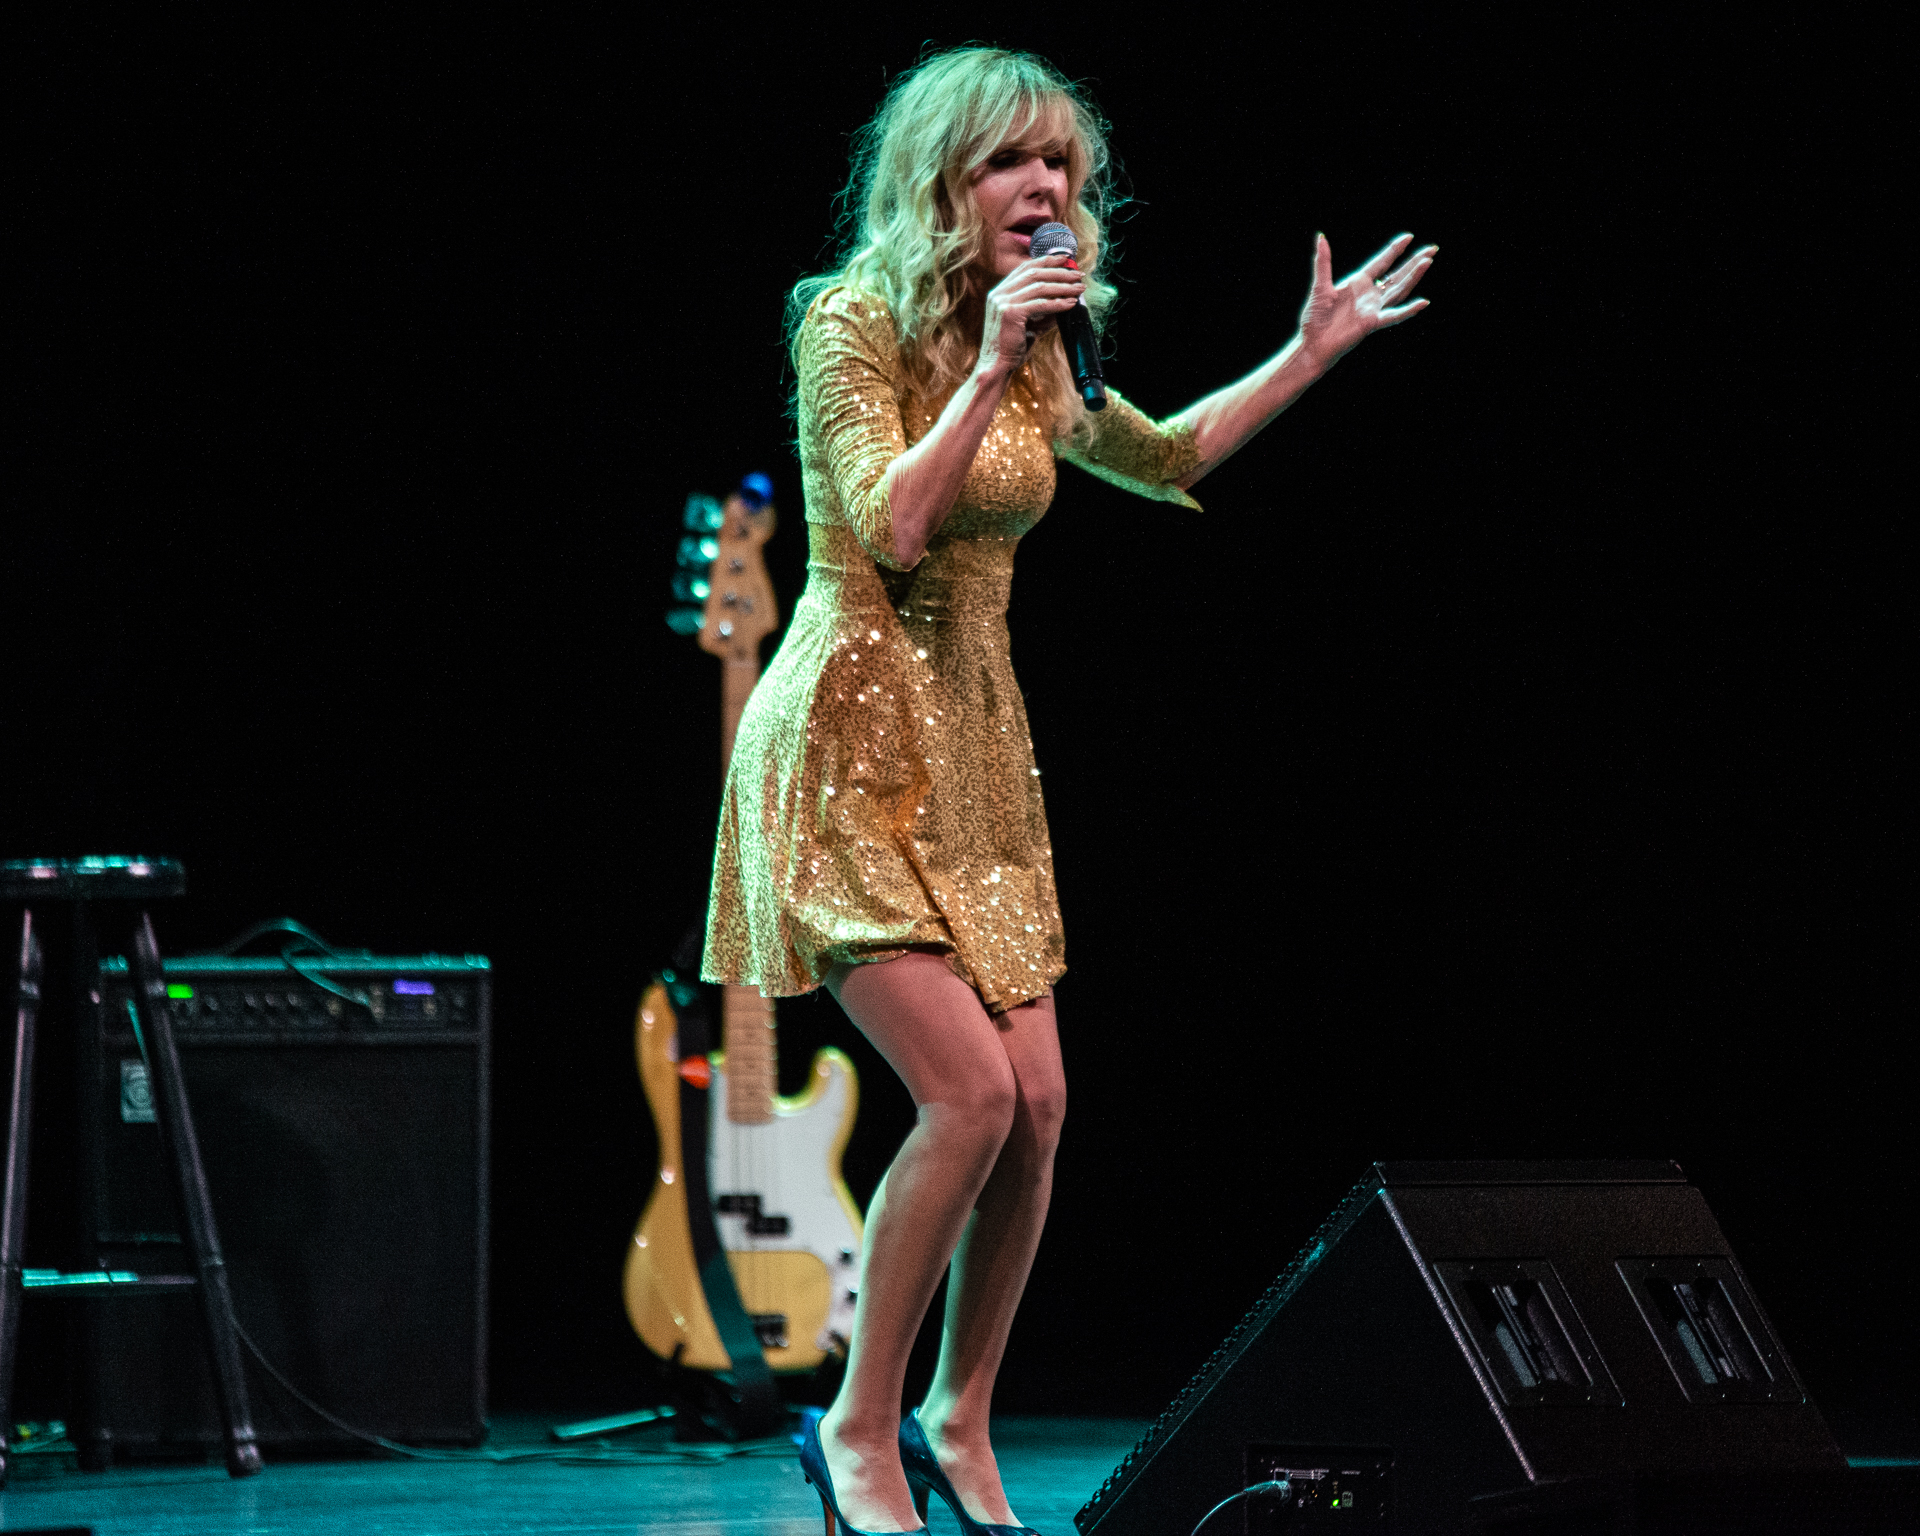 Shelby Chong commands the stage in a dazzling gold, sparkly dress, wielding a microphone with expressive body movements as she addresses the crowd. In the background, a yellow electric guitar adds to the vibrant atmosphere of the performance.